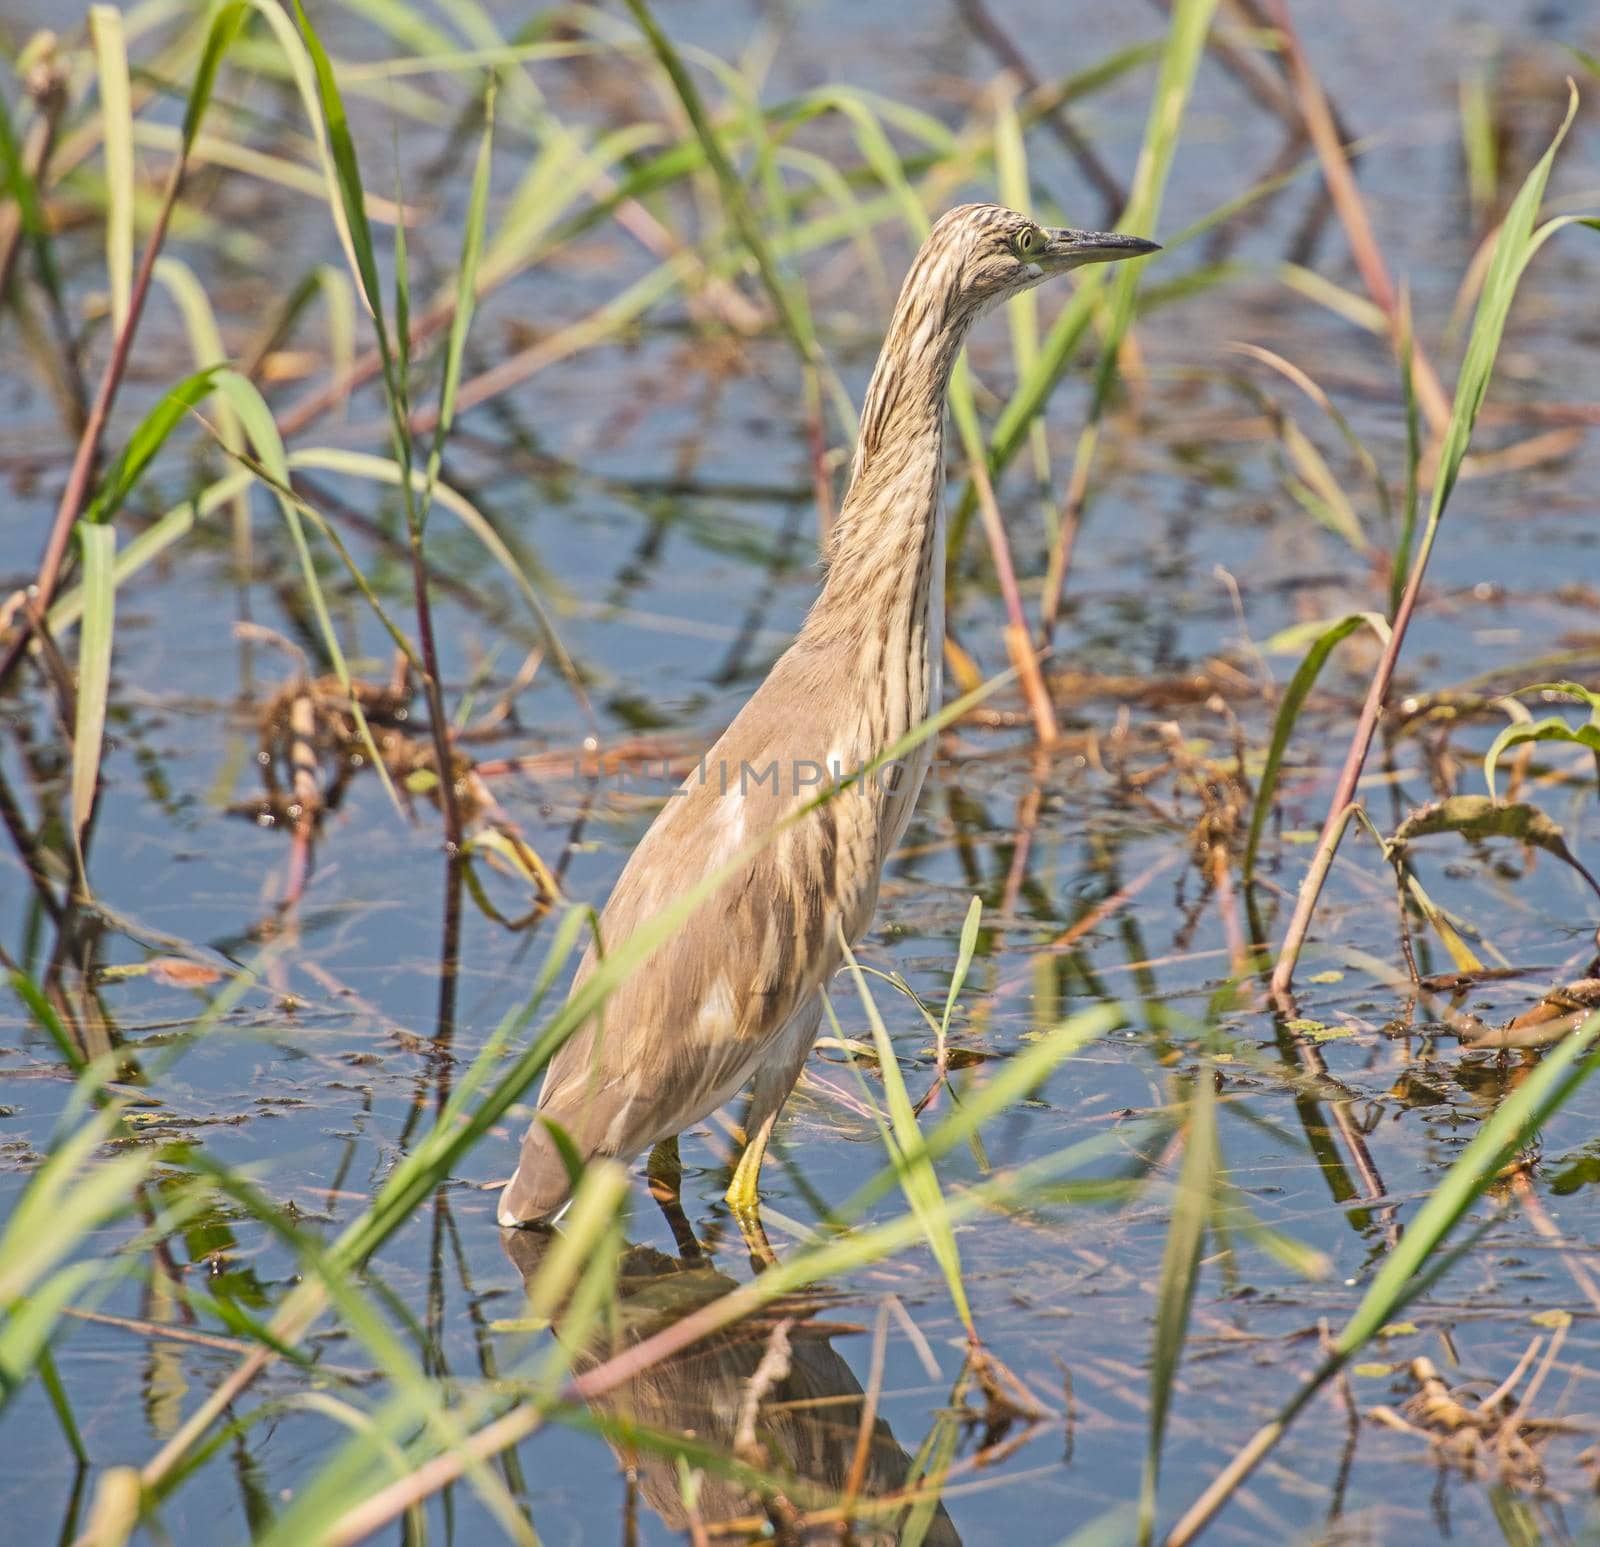 Squacco heron stood in grass reeds by river bank by paulvinten